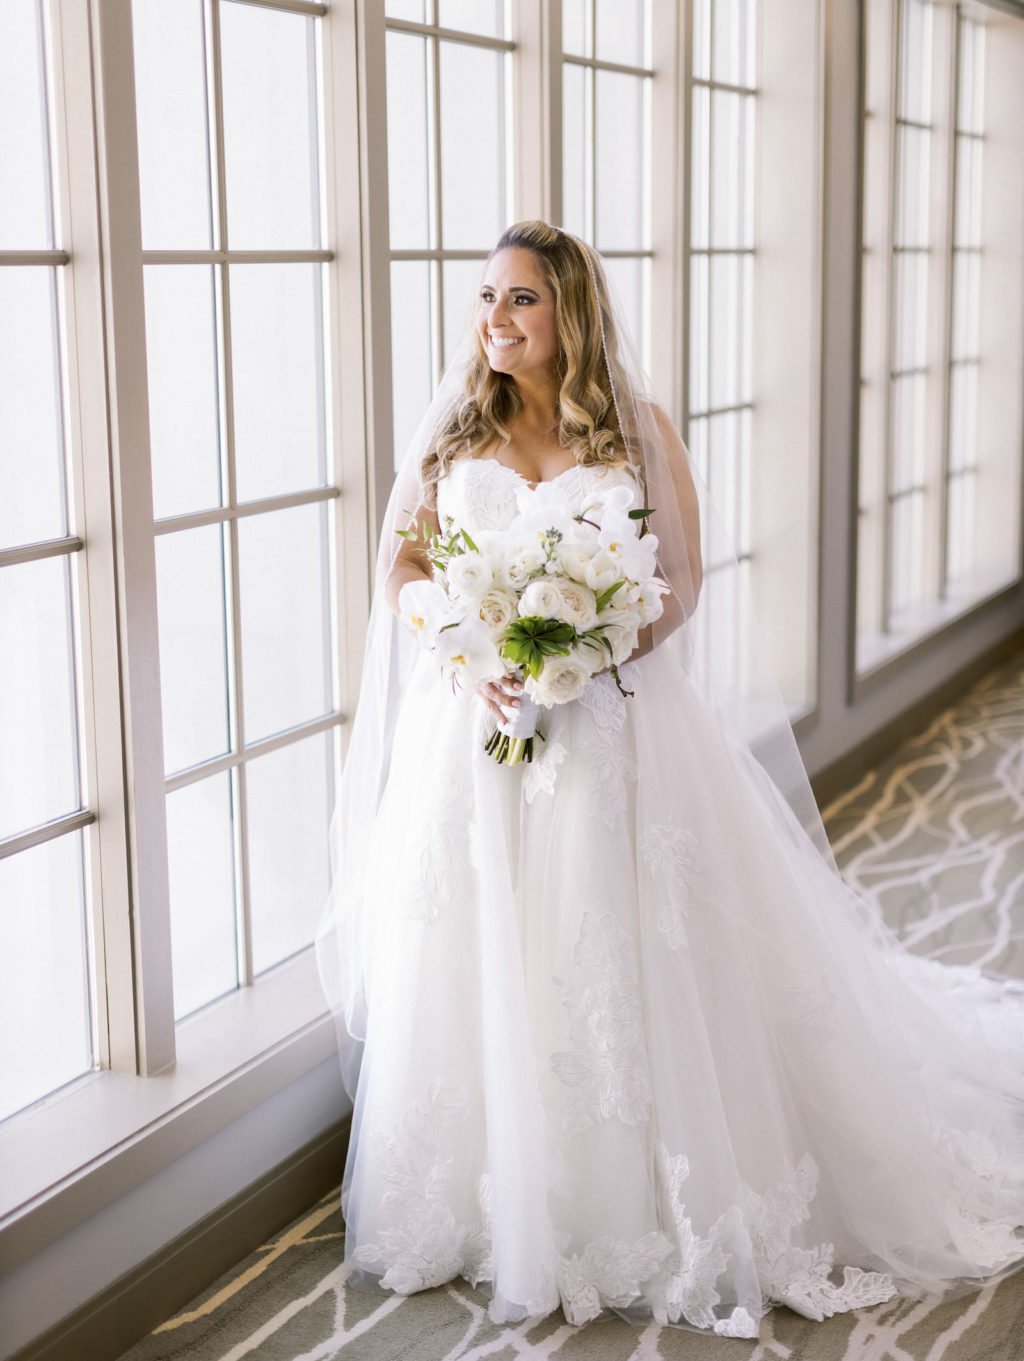 Traditional Tampa Bride in Lace and Tulle Ballgown Wedding Dress Holding Classic White Floral Bouquet